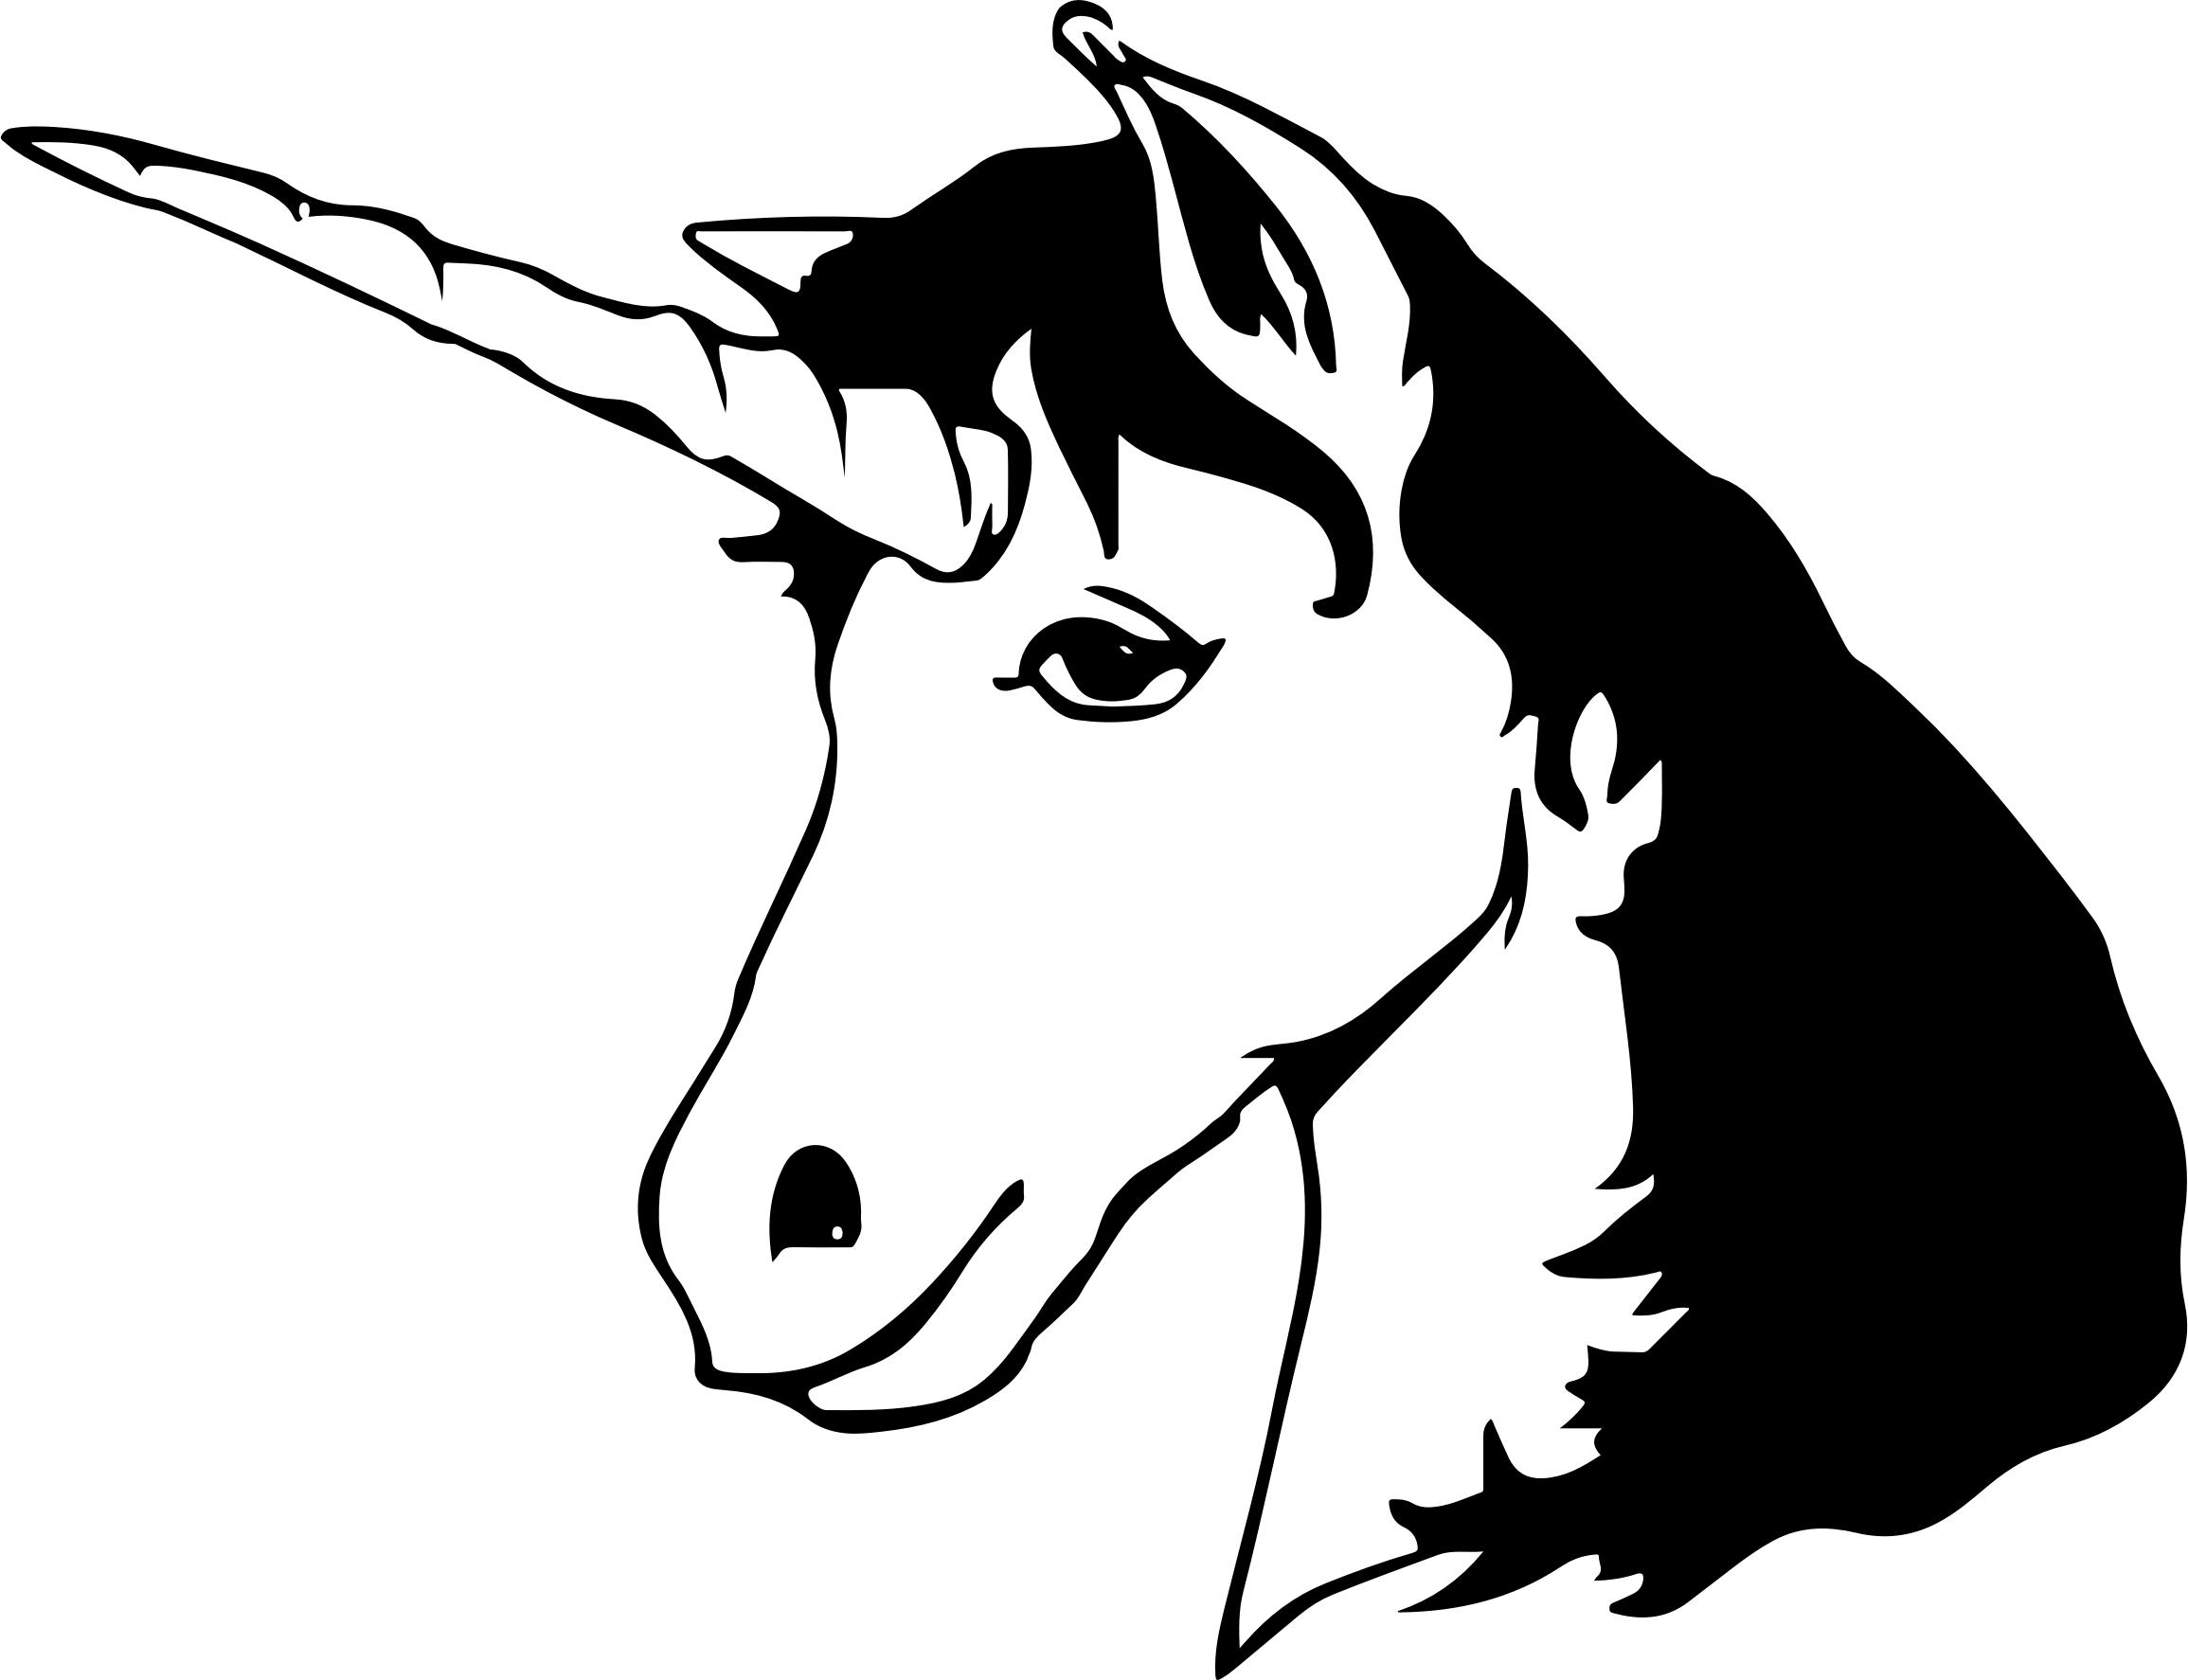 Unicorn Silhouette Free at GetDrawings | Free download